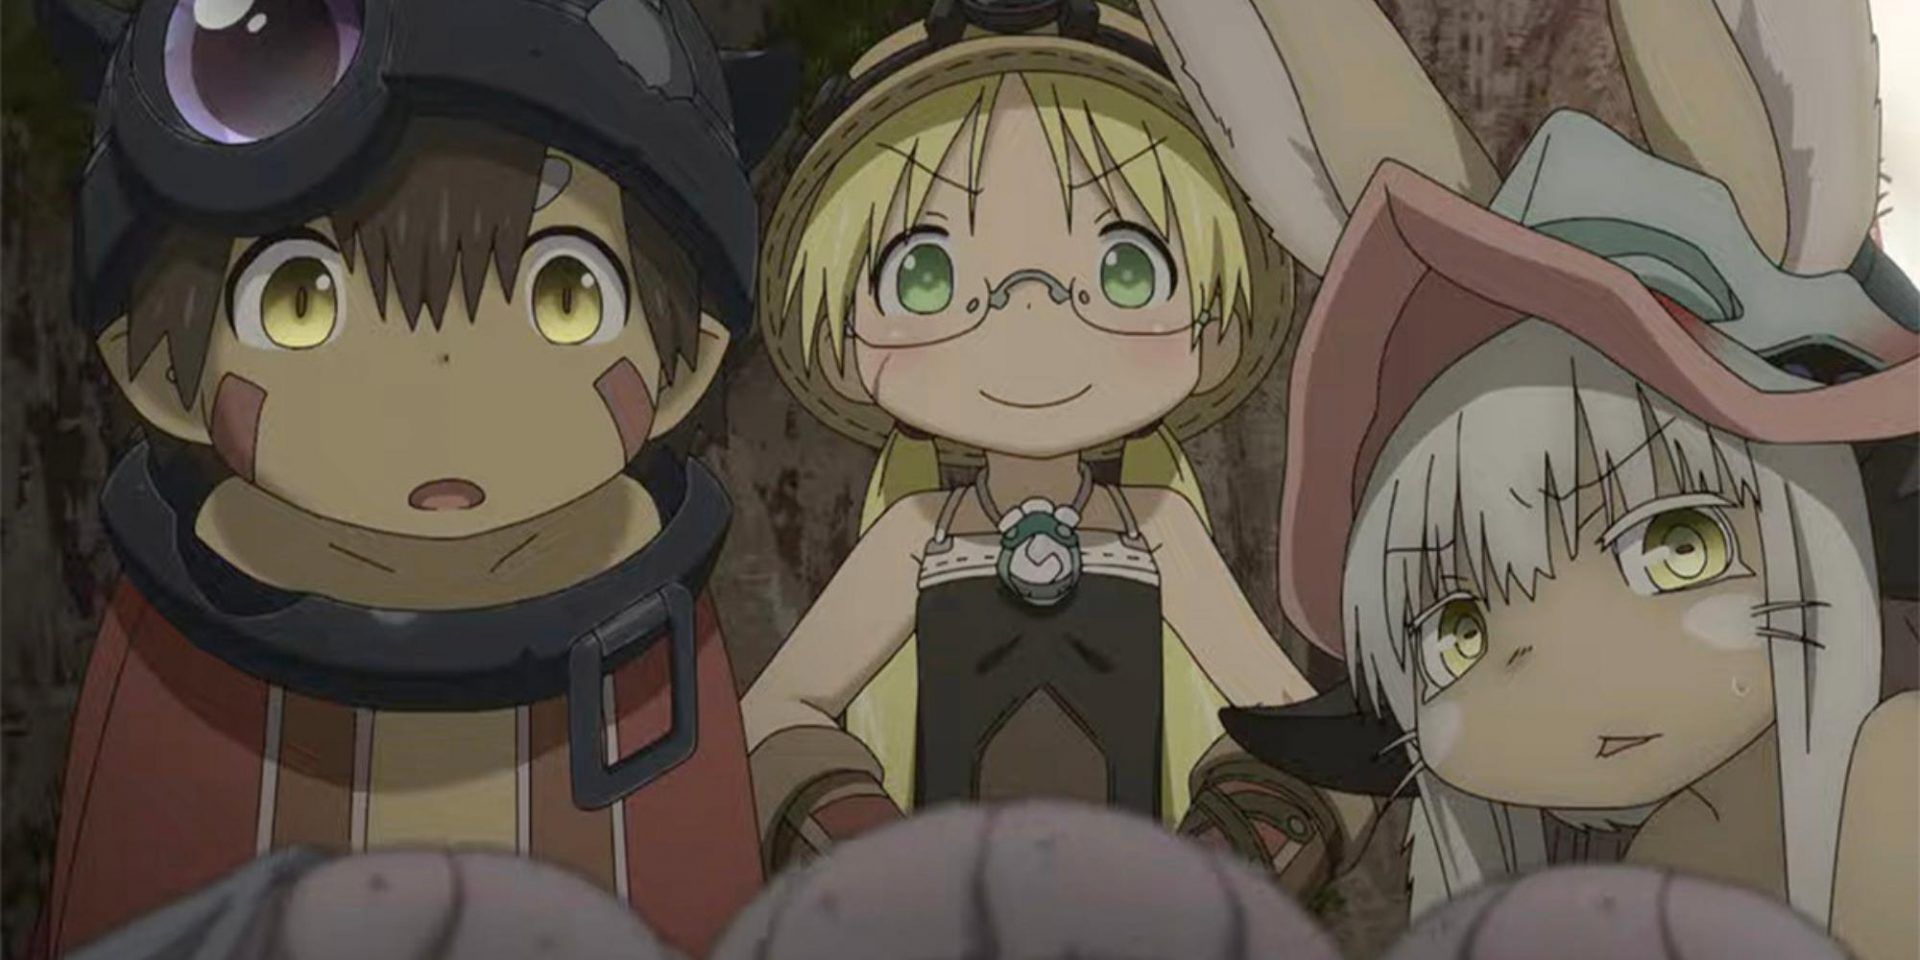 Made in Abyss season 2 episode 7